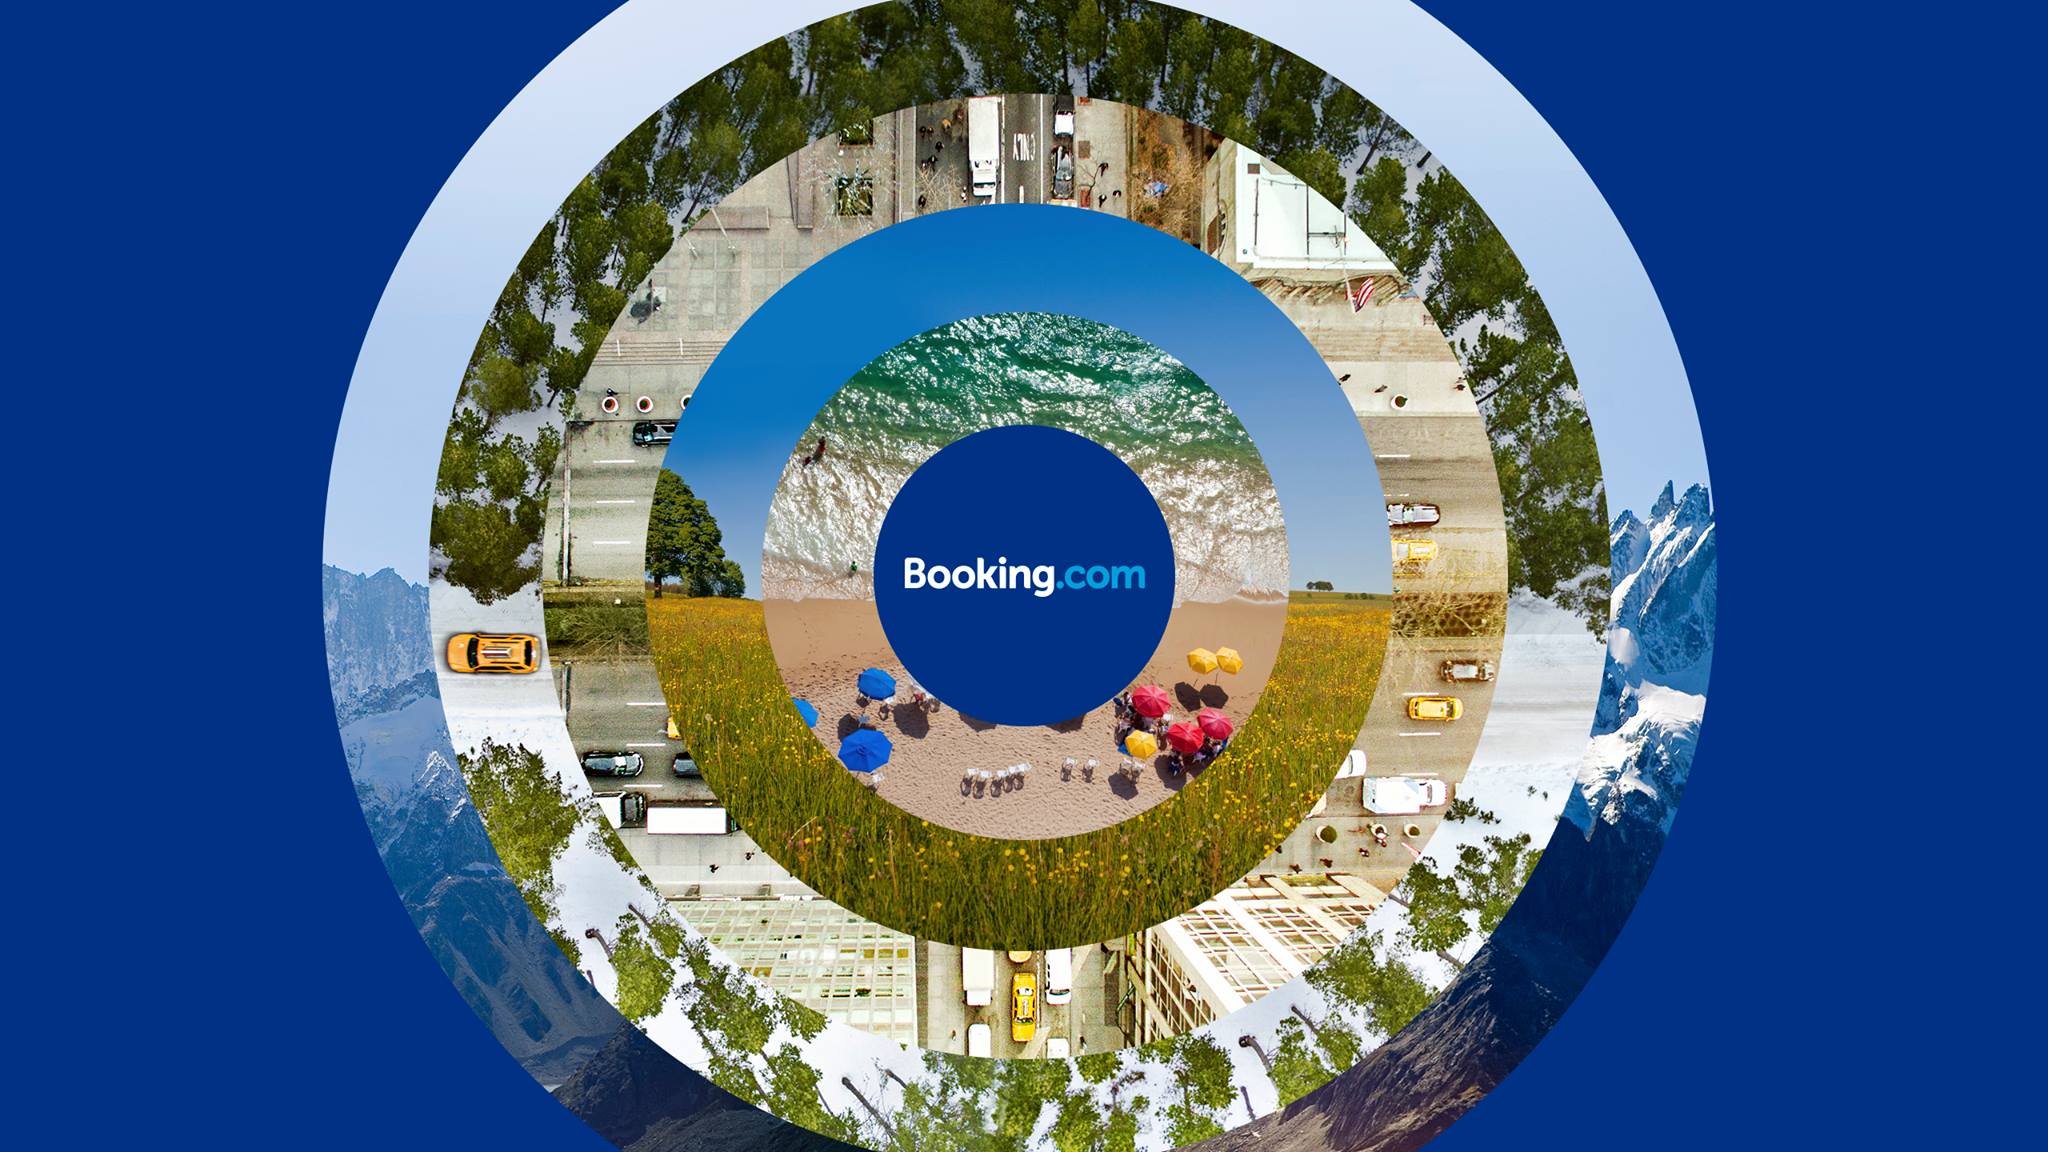 Competition Authority Imposes a Record Fine on Booking.com